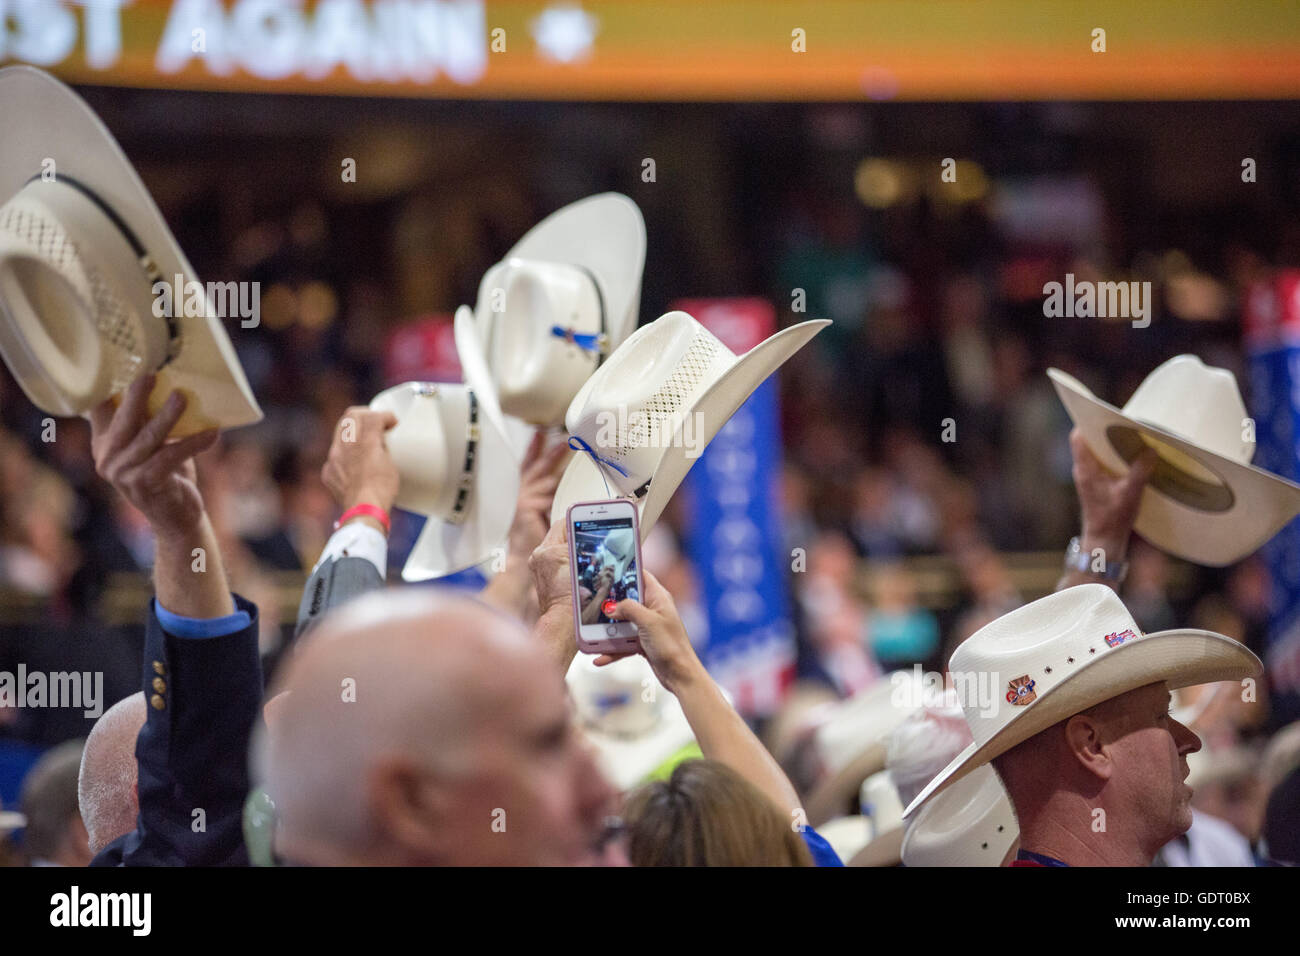 Cleveland, Ohio, USA; July 20, 2016: Texas delegates wave their hats when Senator Ted Cruz is introduced, at Republican National Convention. (Philip Scalia/Alamy Live News) Stock Photo